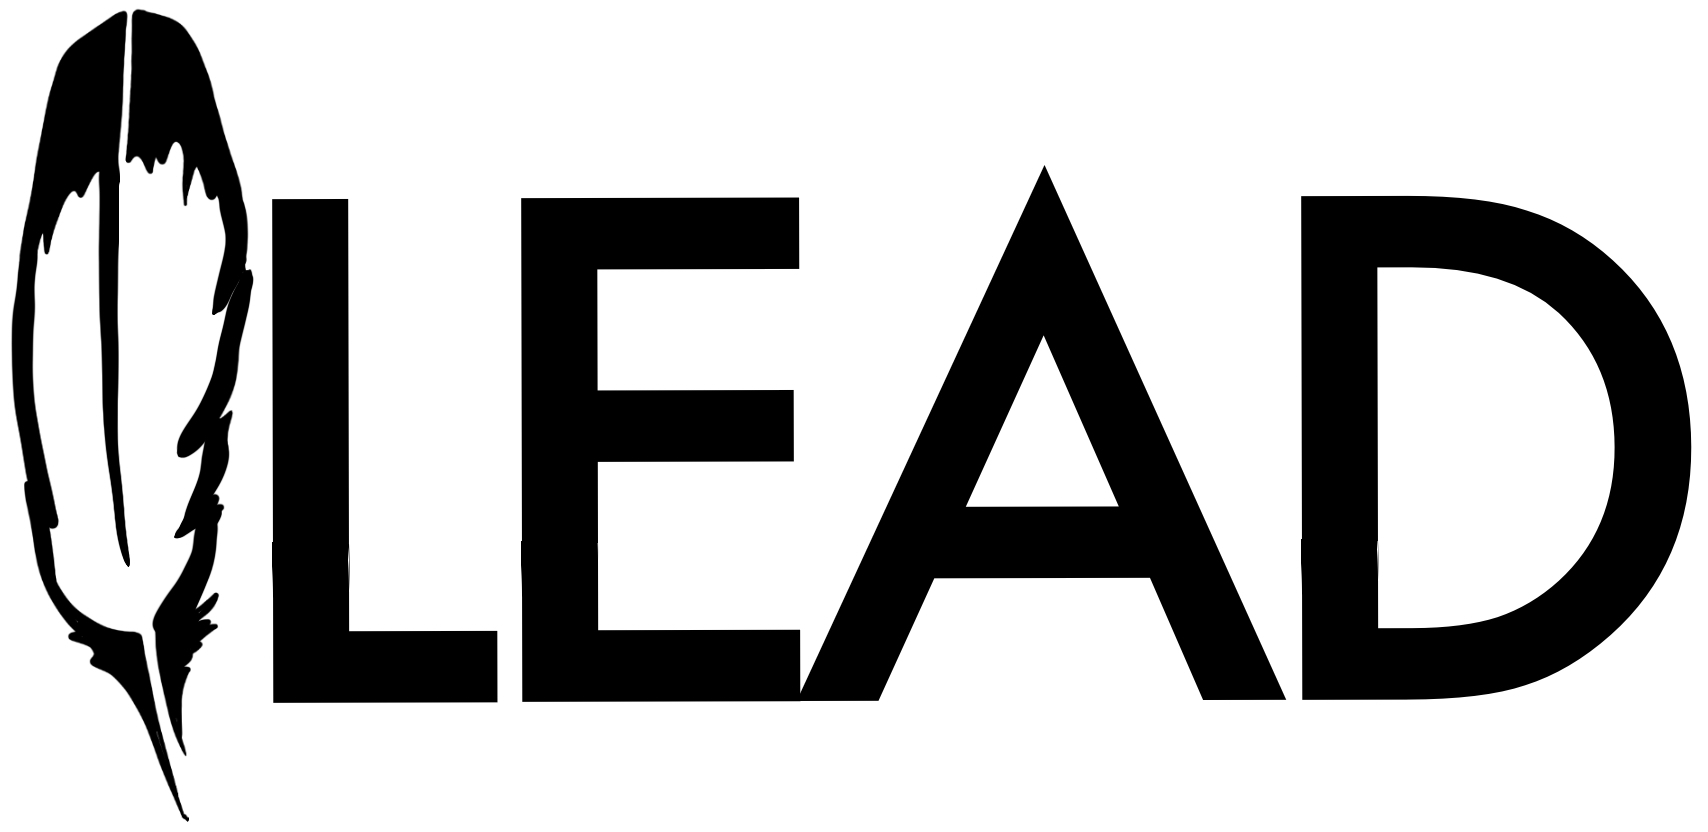 The word ILEAD with the "I" as a feather and the "LEAD" as bold, black, capitalized letters.